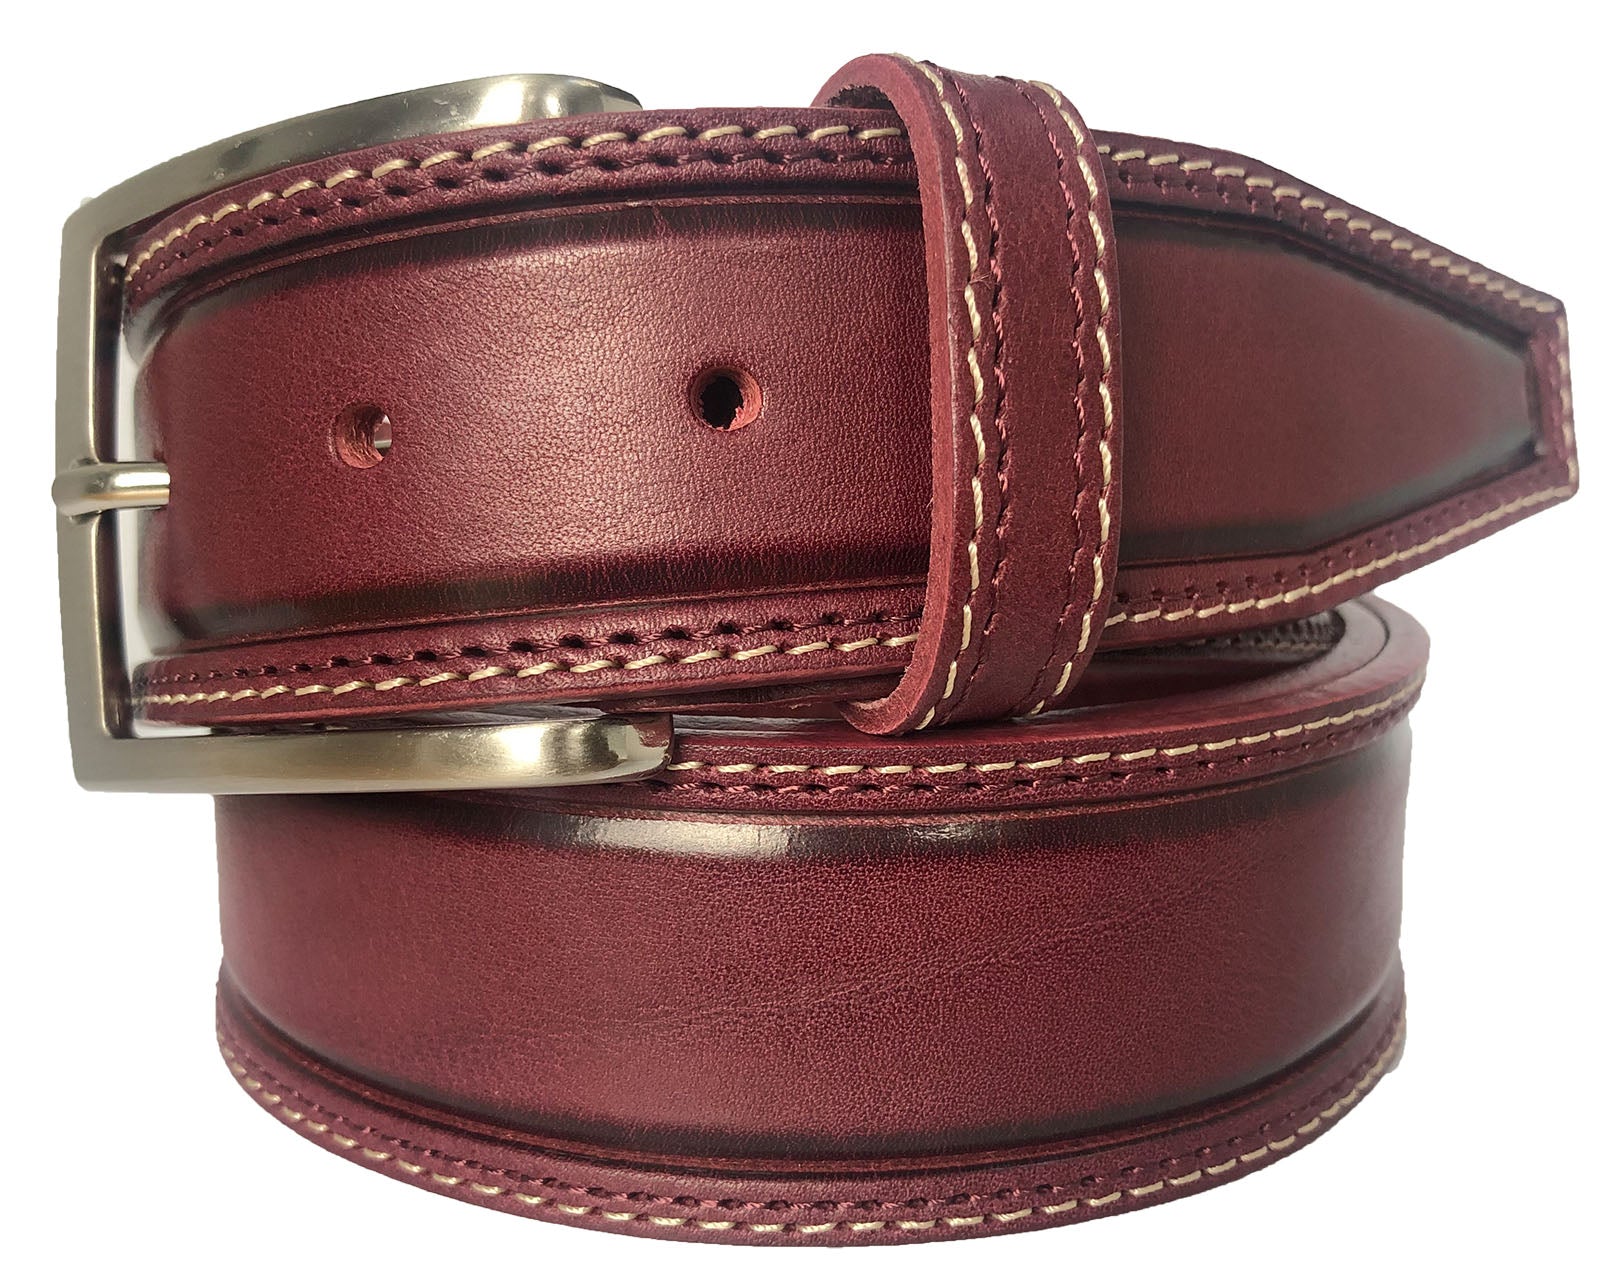 BURGUNDY DOUBLE STITCHED LEATHER BELT